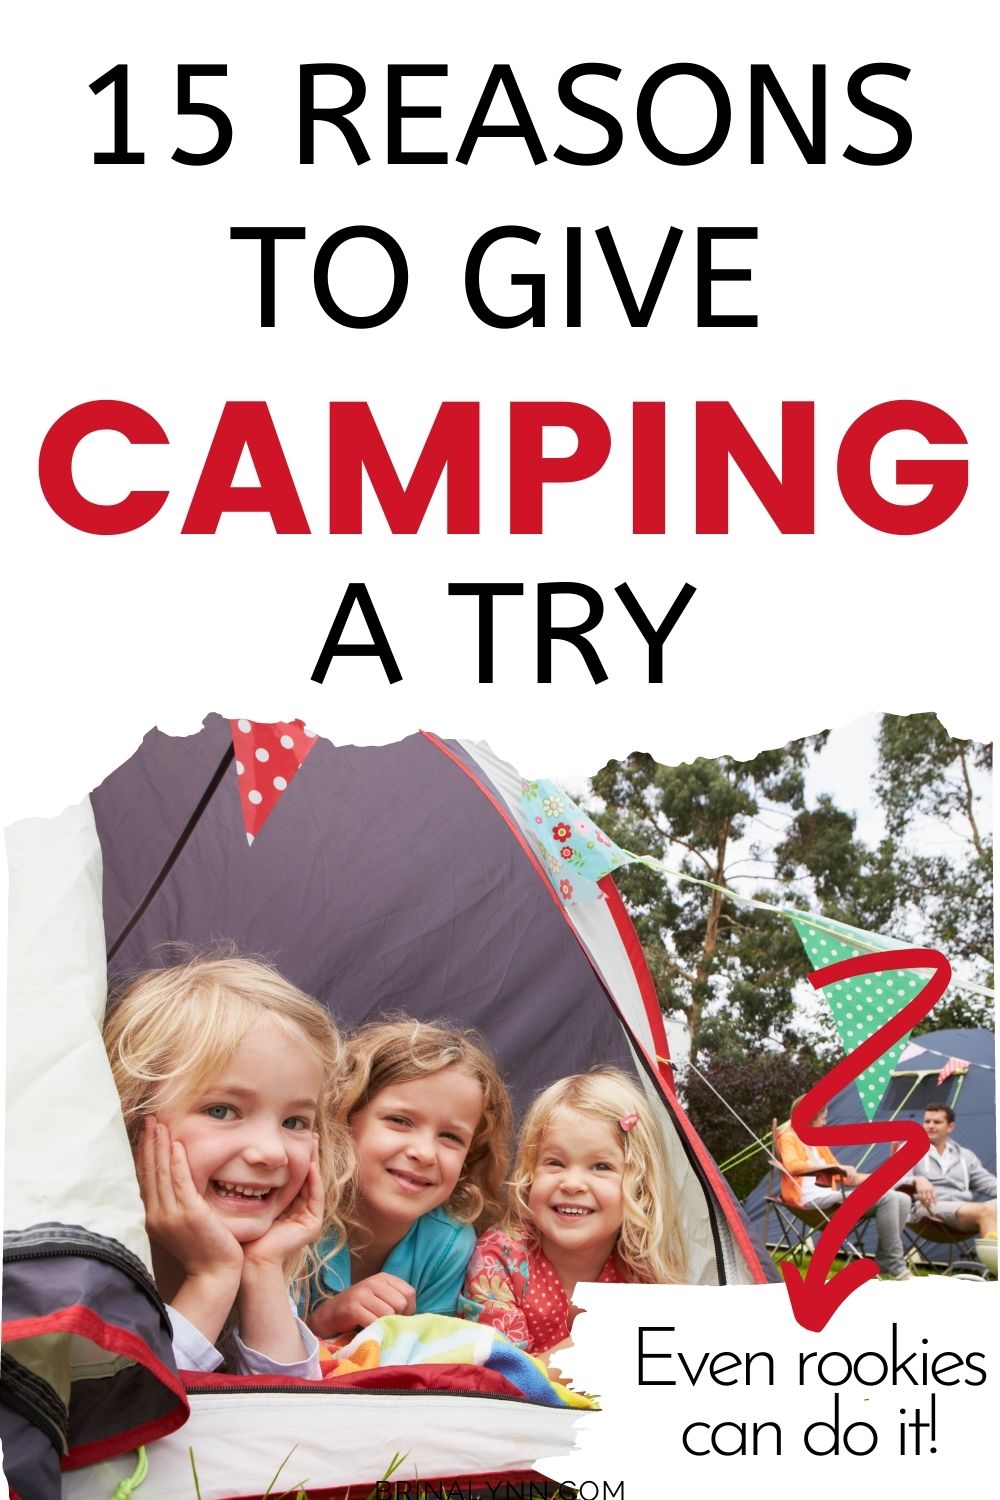 15 Reasons to Give Camping a Try